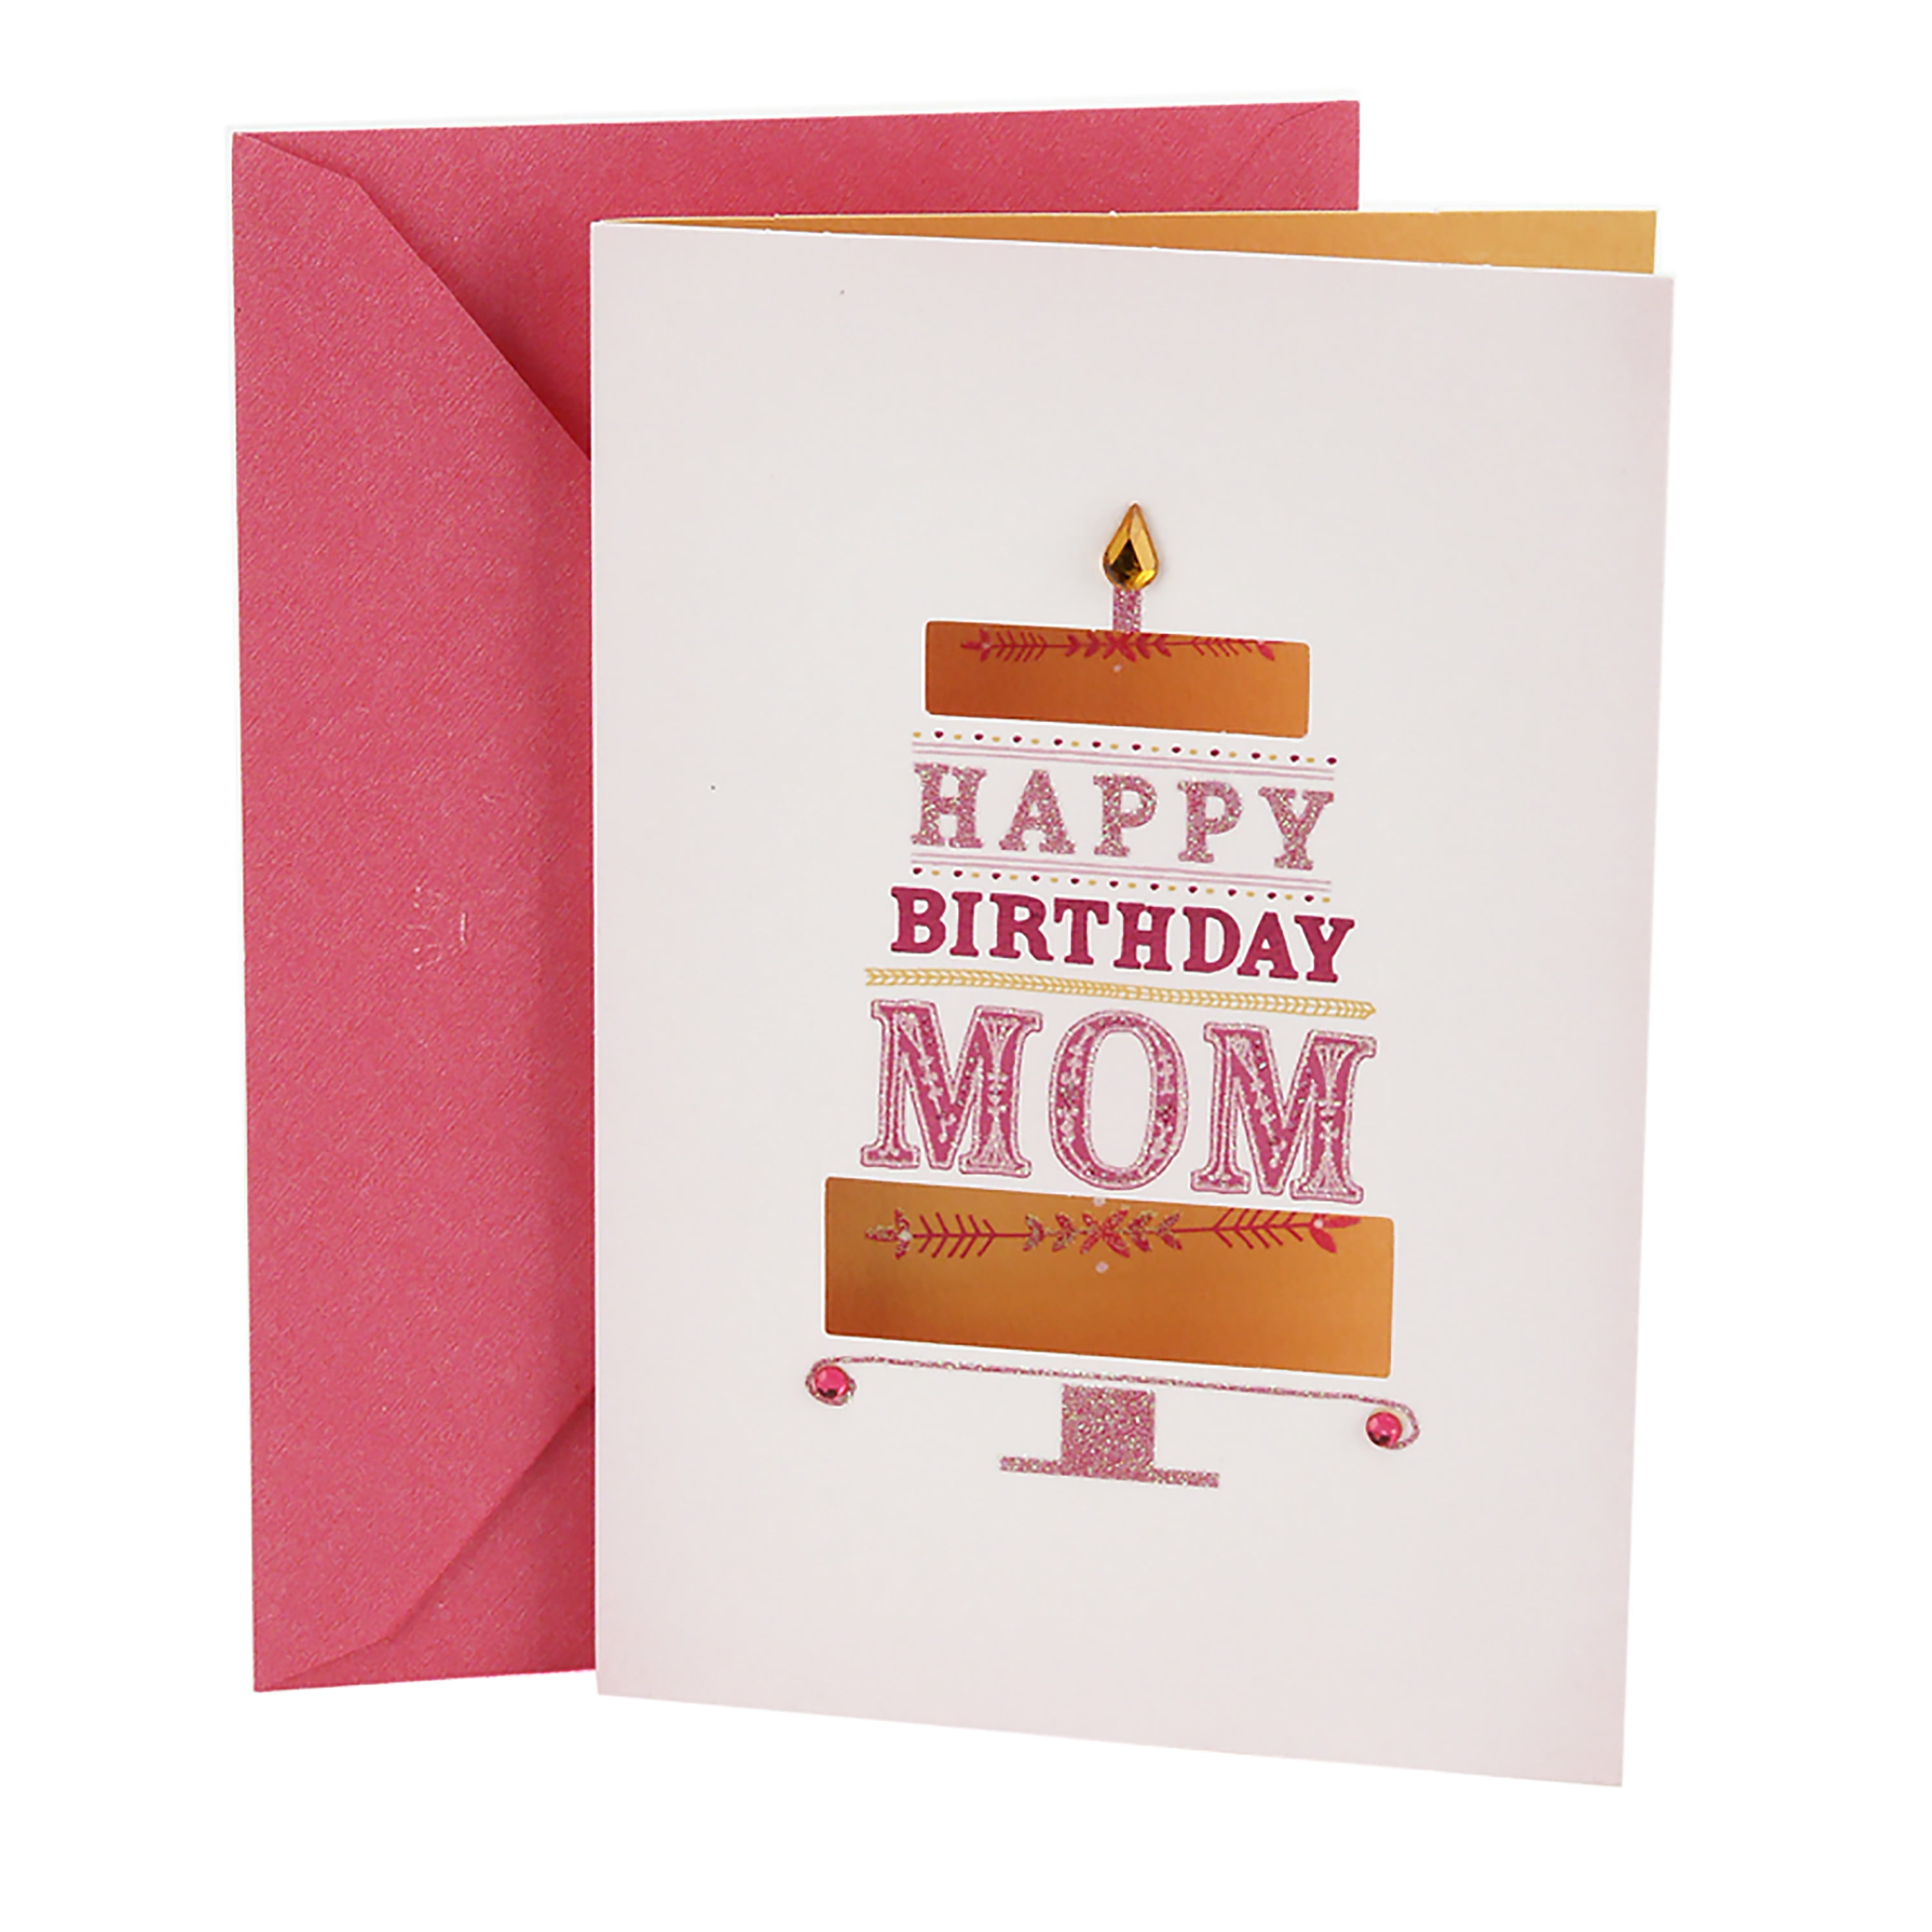 Hallmark Birthday Card for Mom (Pink and Gold Cake) 